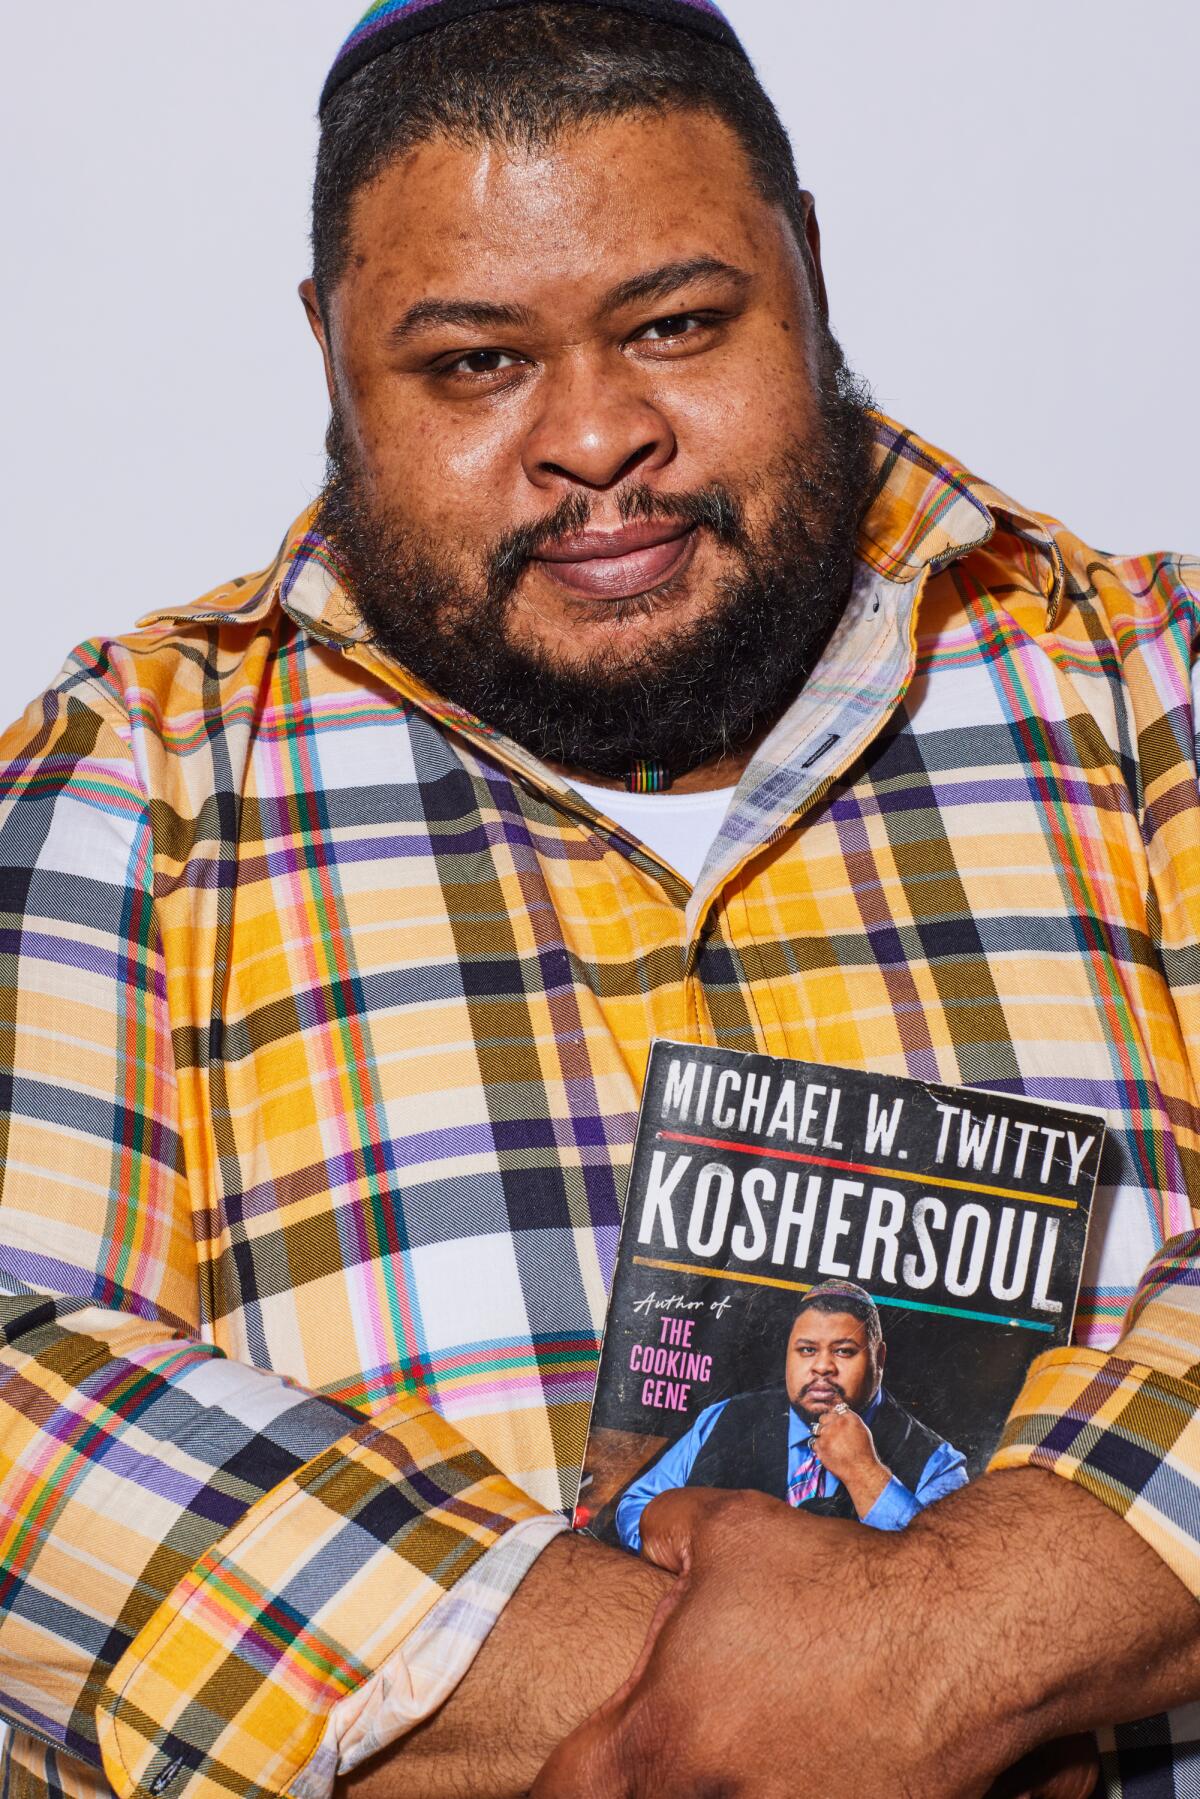 Chef Michael Twitty holds his book "Koshersoul"